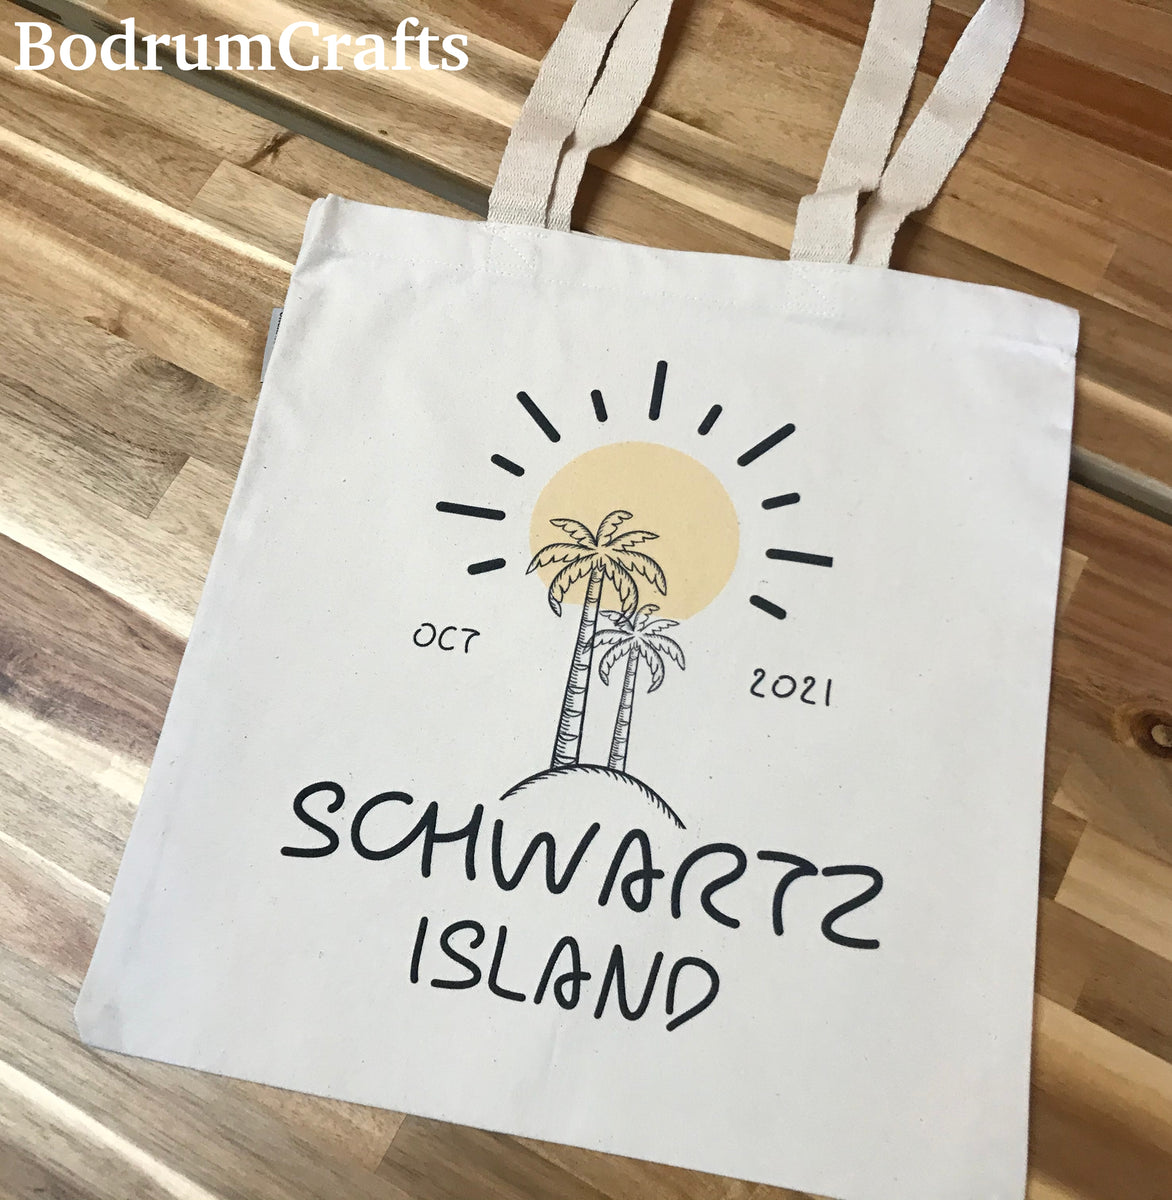 Order Canvas Tote Bags in Bulk from Custom Ink